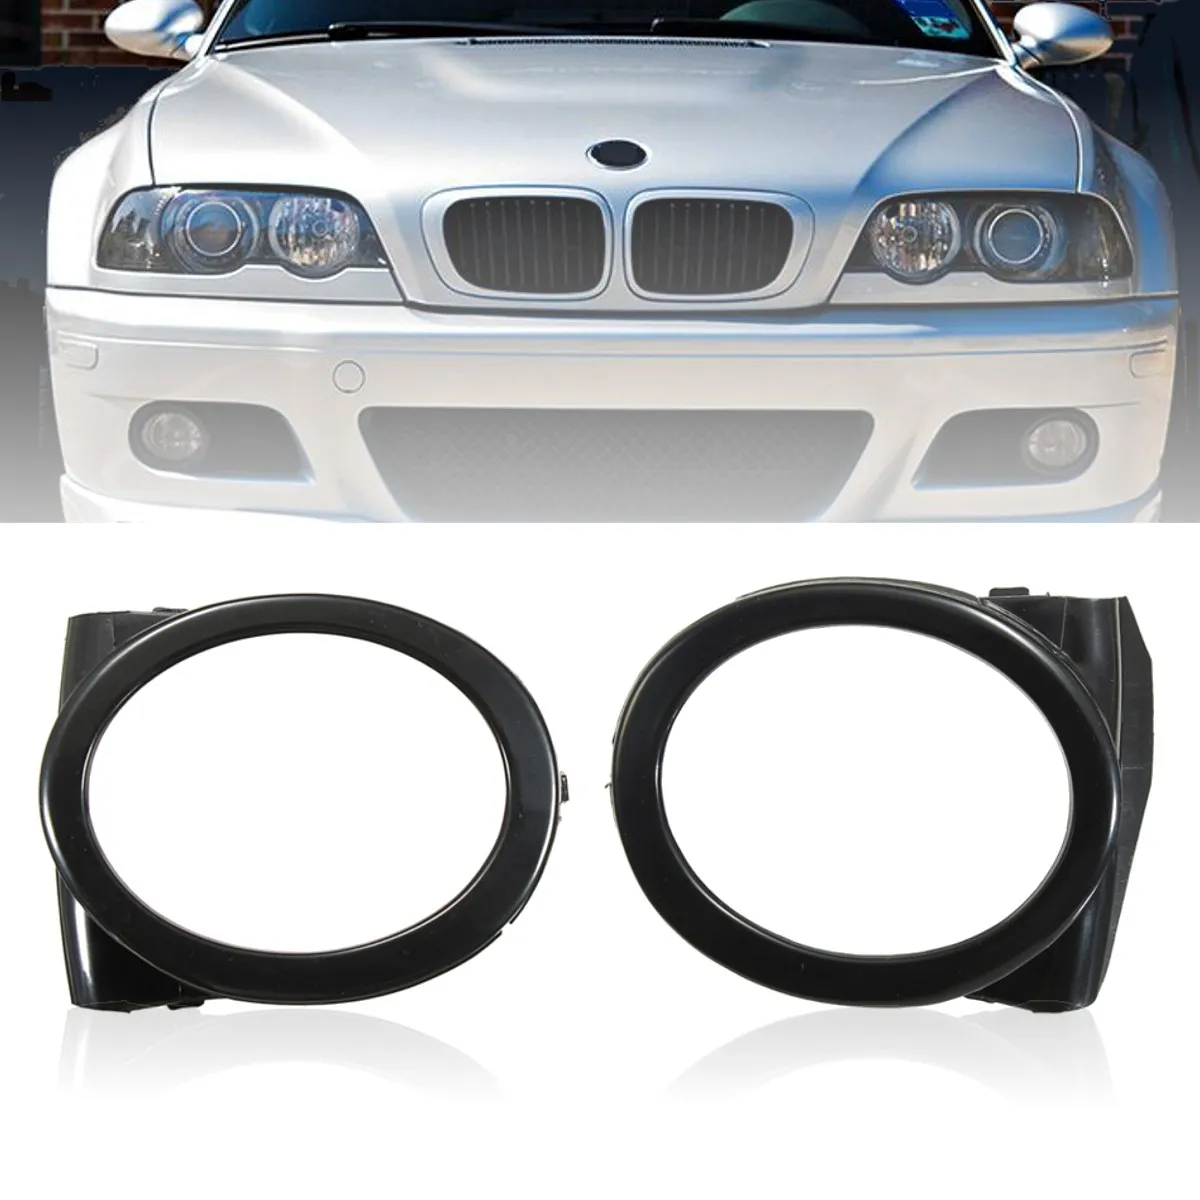 1 Pair Black Car Fog Light Covers for BMW E46 M3 Style 2001 - 2006 Left+Right Front Bumper Light Surround Cover